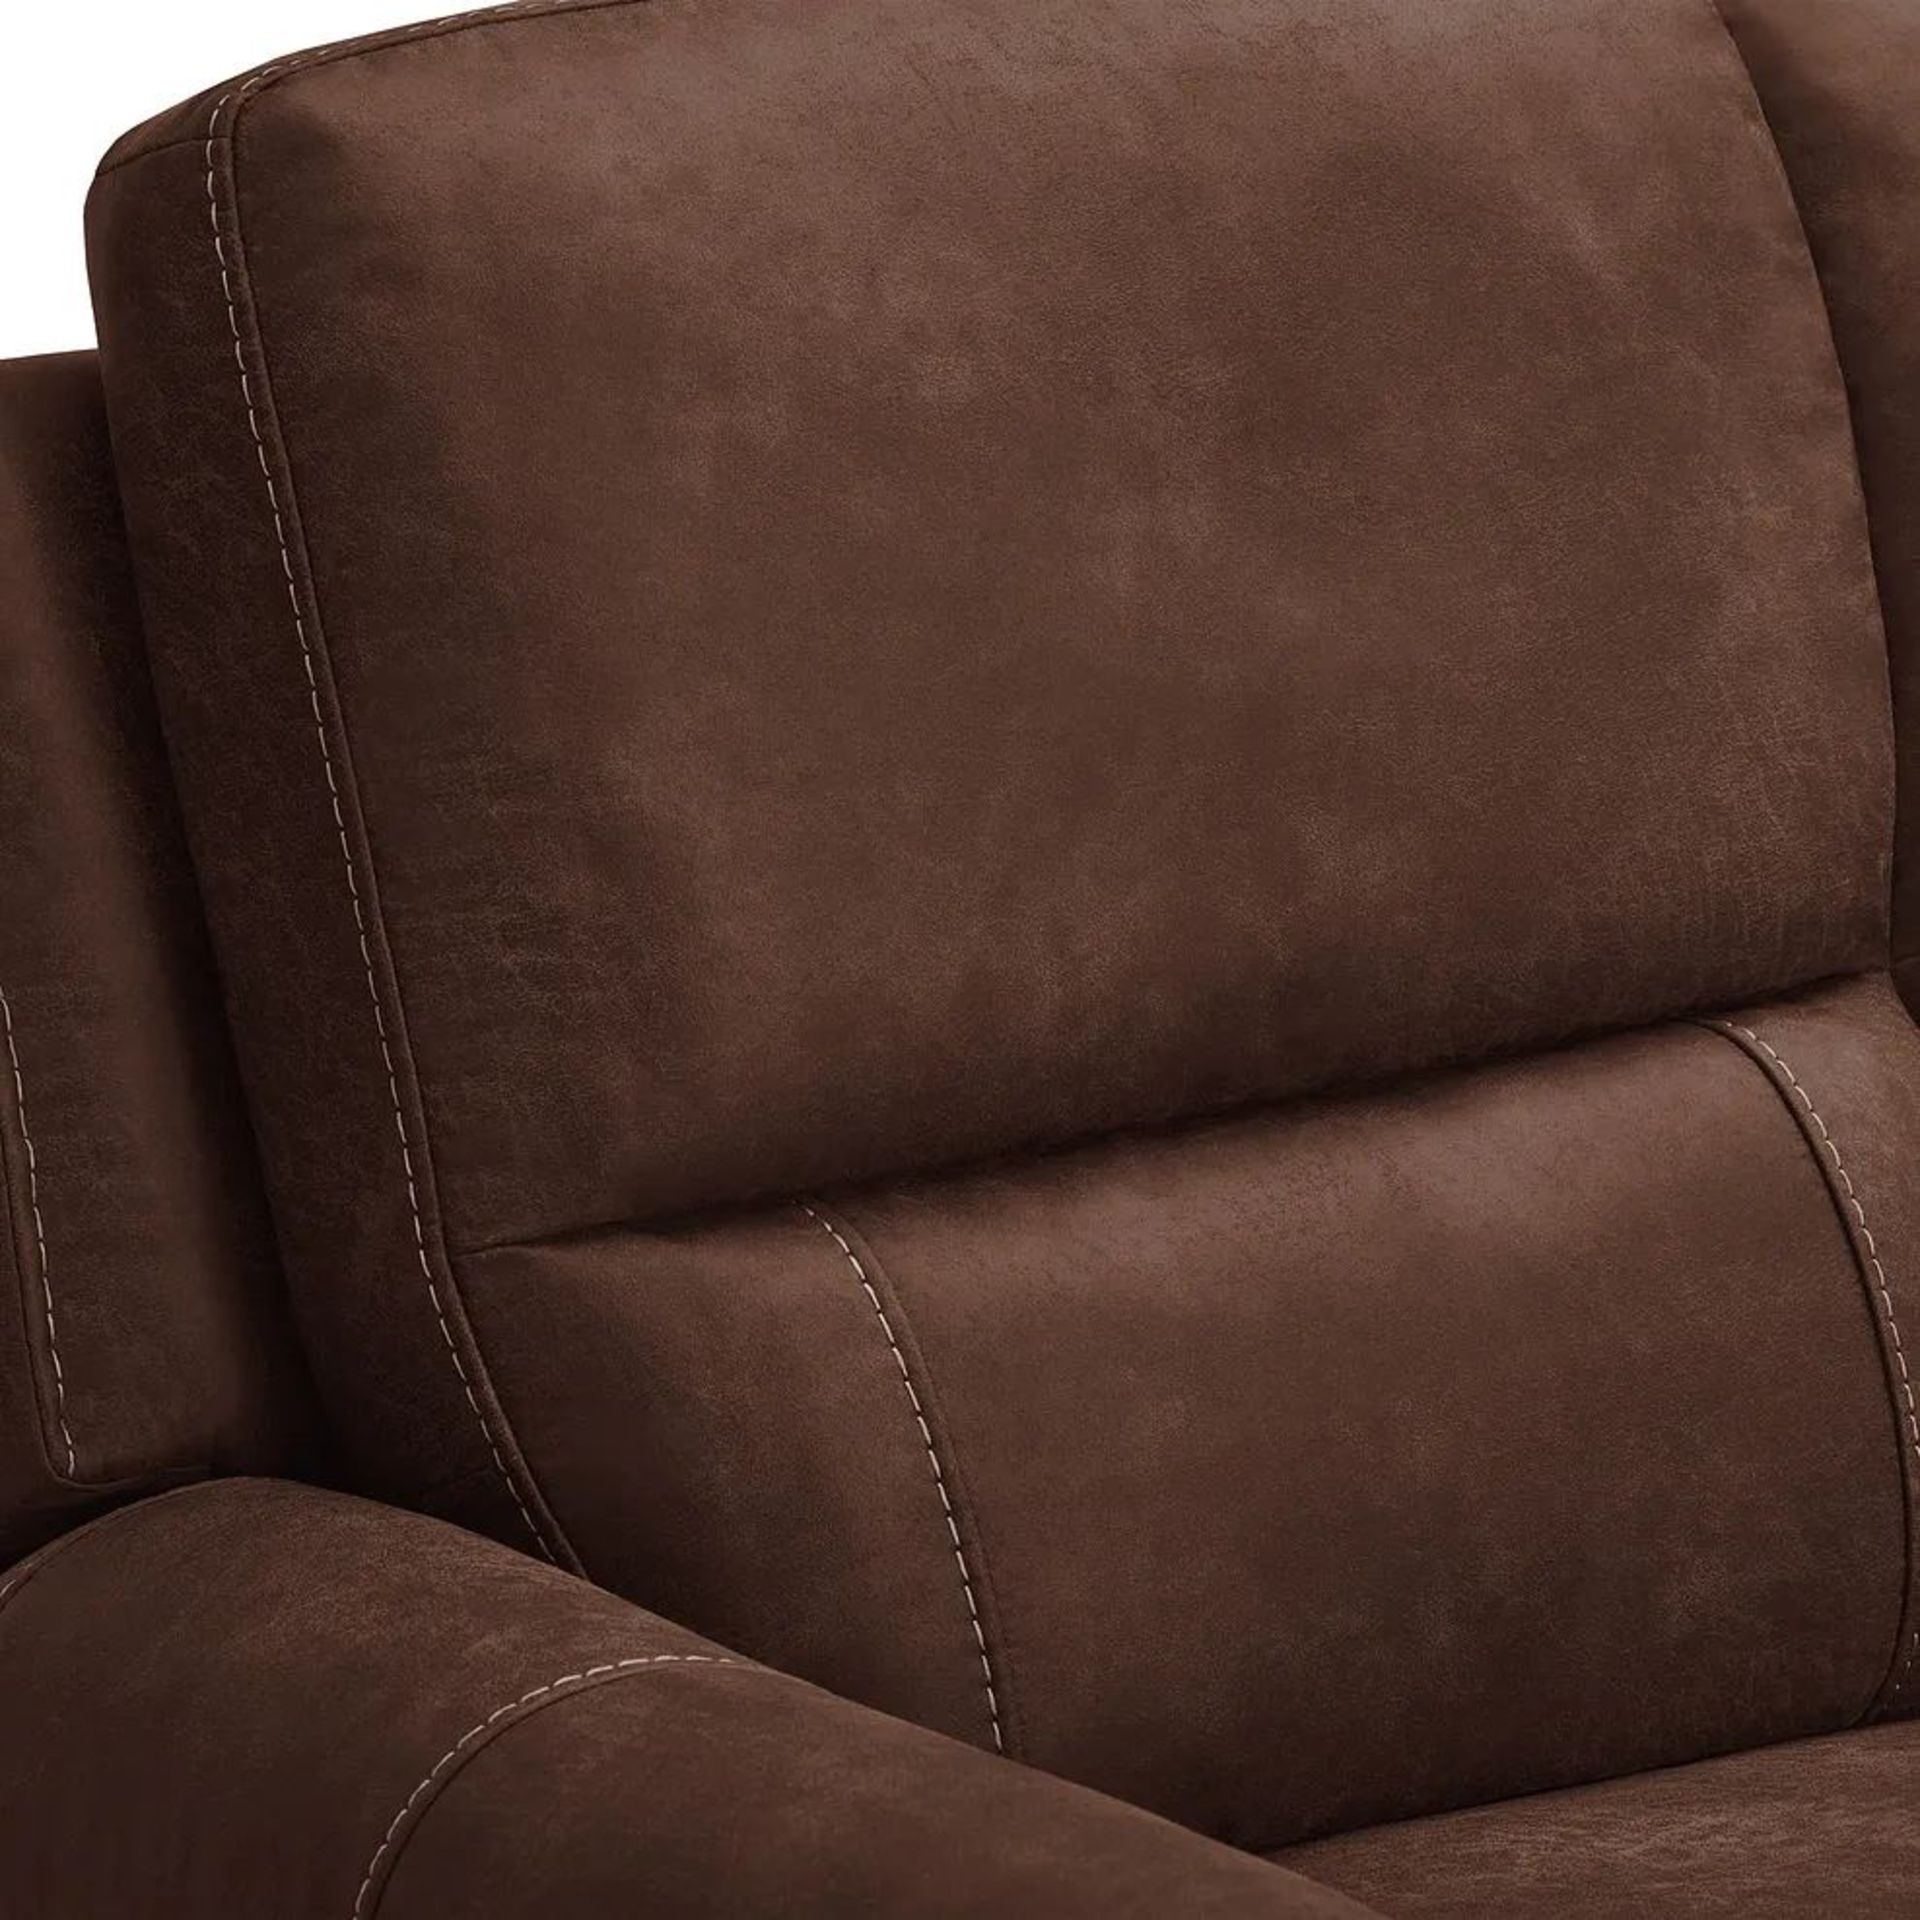 BRAND NEW COLORADO 3 Seater Sofa - DARK BROWN FABRIC. RRP £1099. Shown here in Ranch dark brown, our - Image 5 of 5